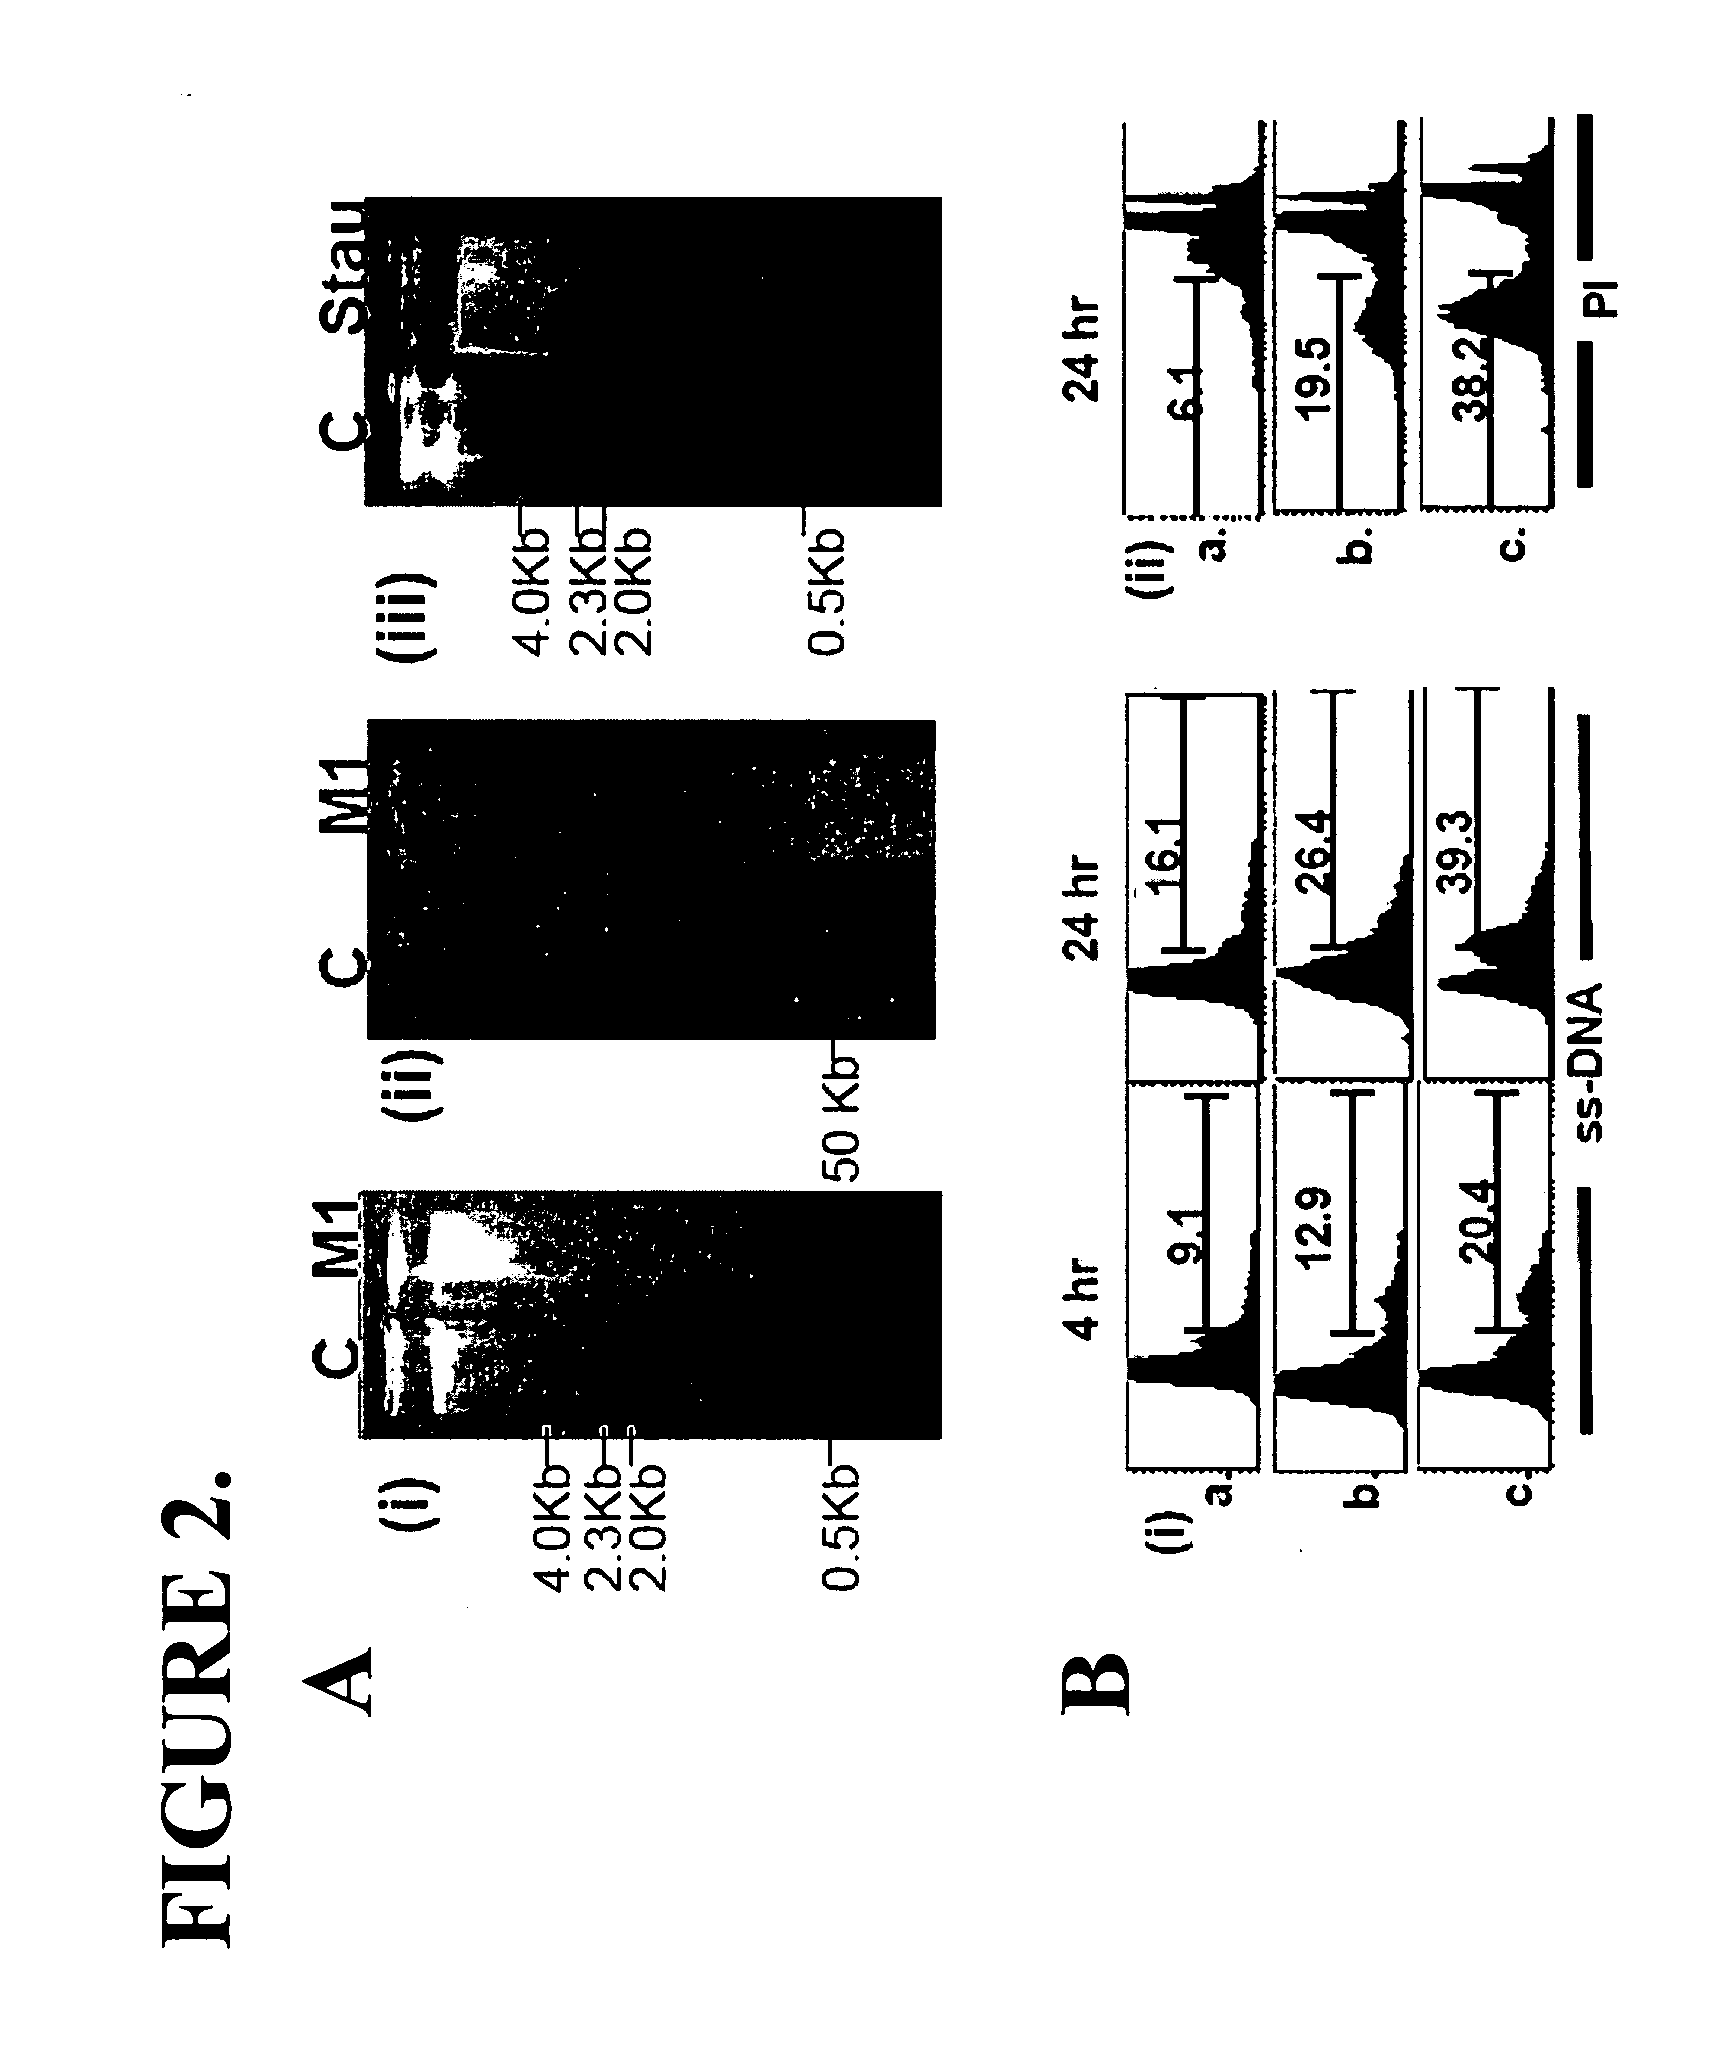 Methods for improving immunotherapy by enhancing survival of antigen-specific cytotoxic T lymphocytes